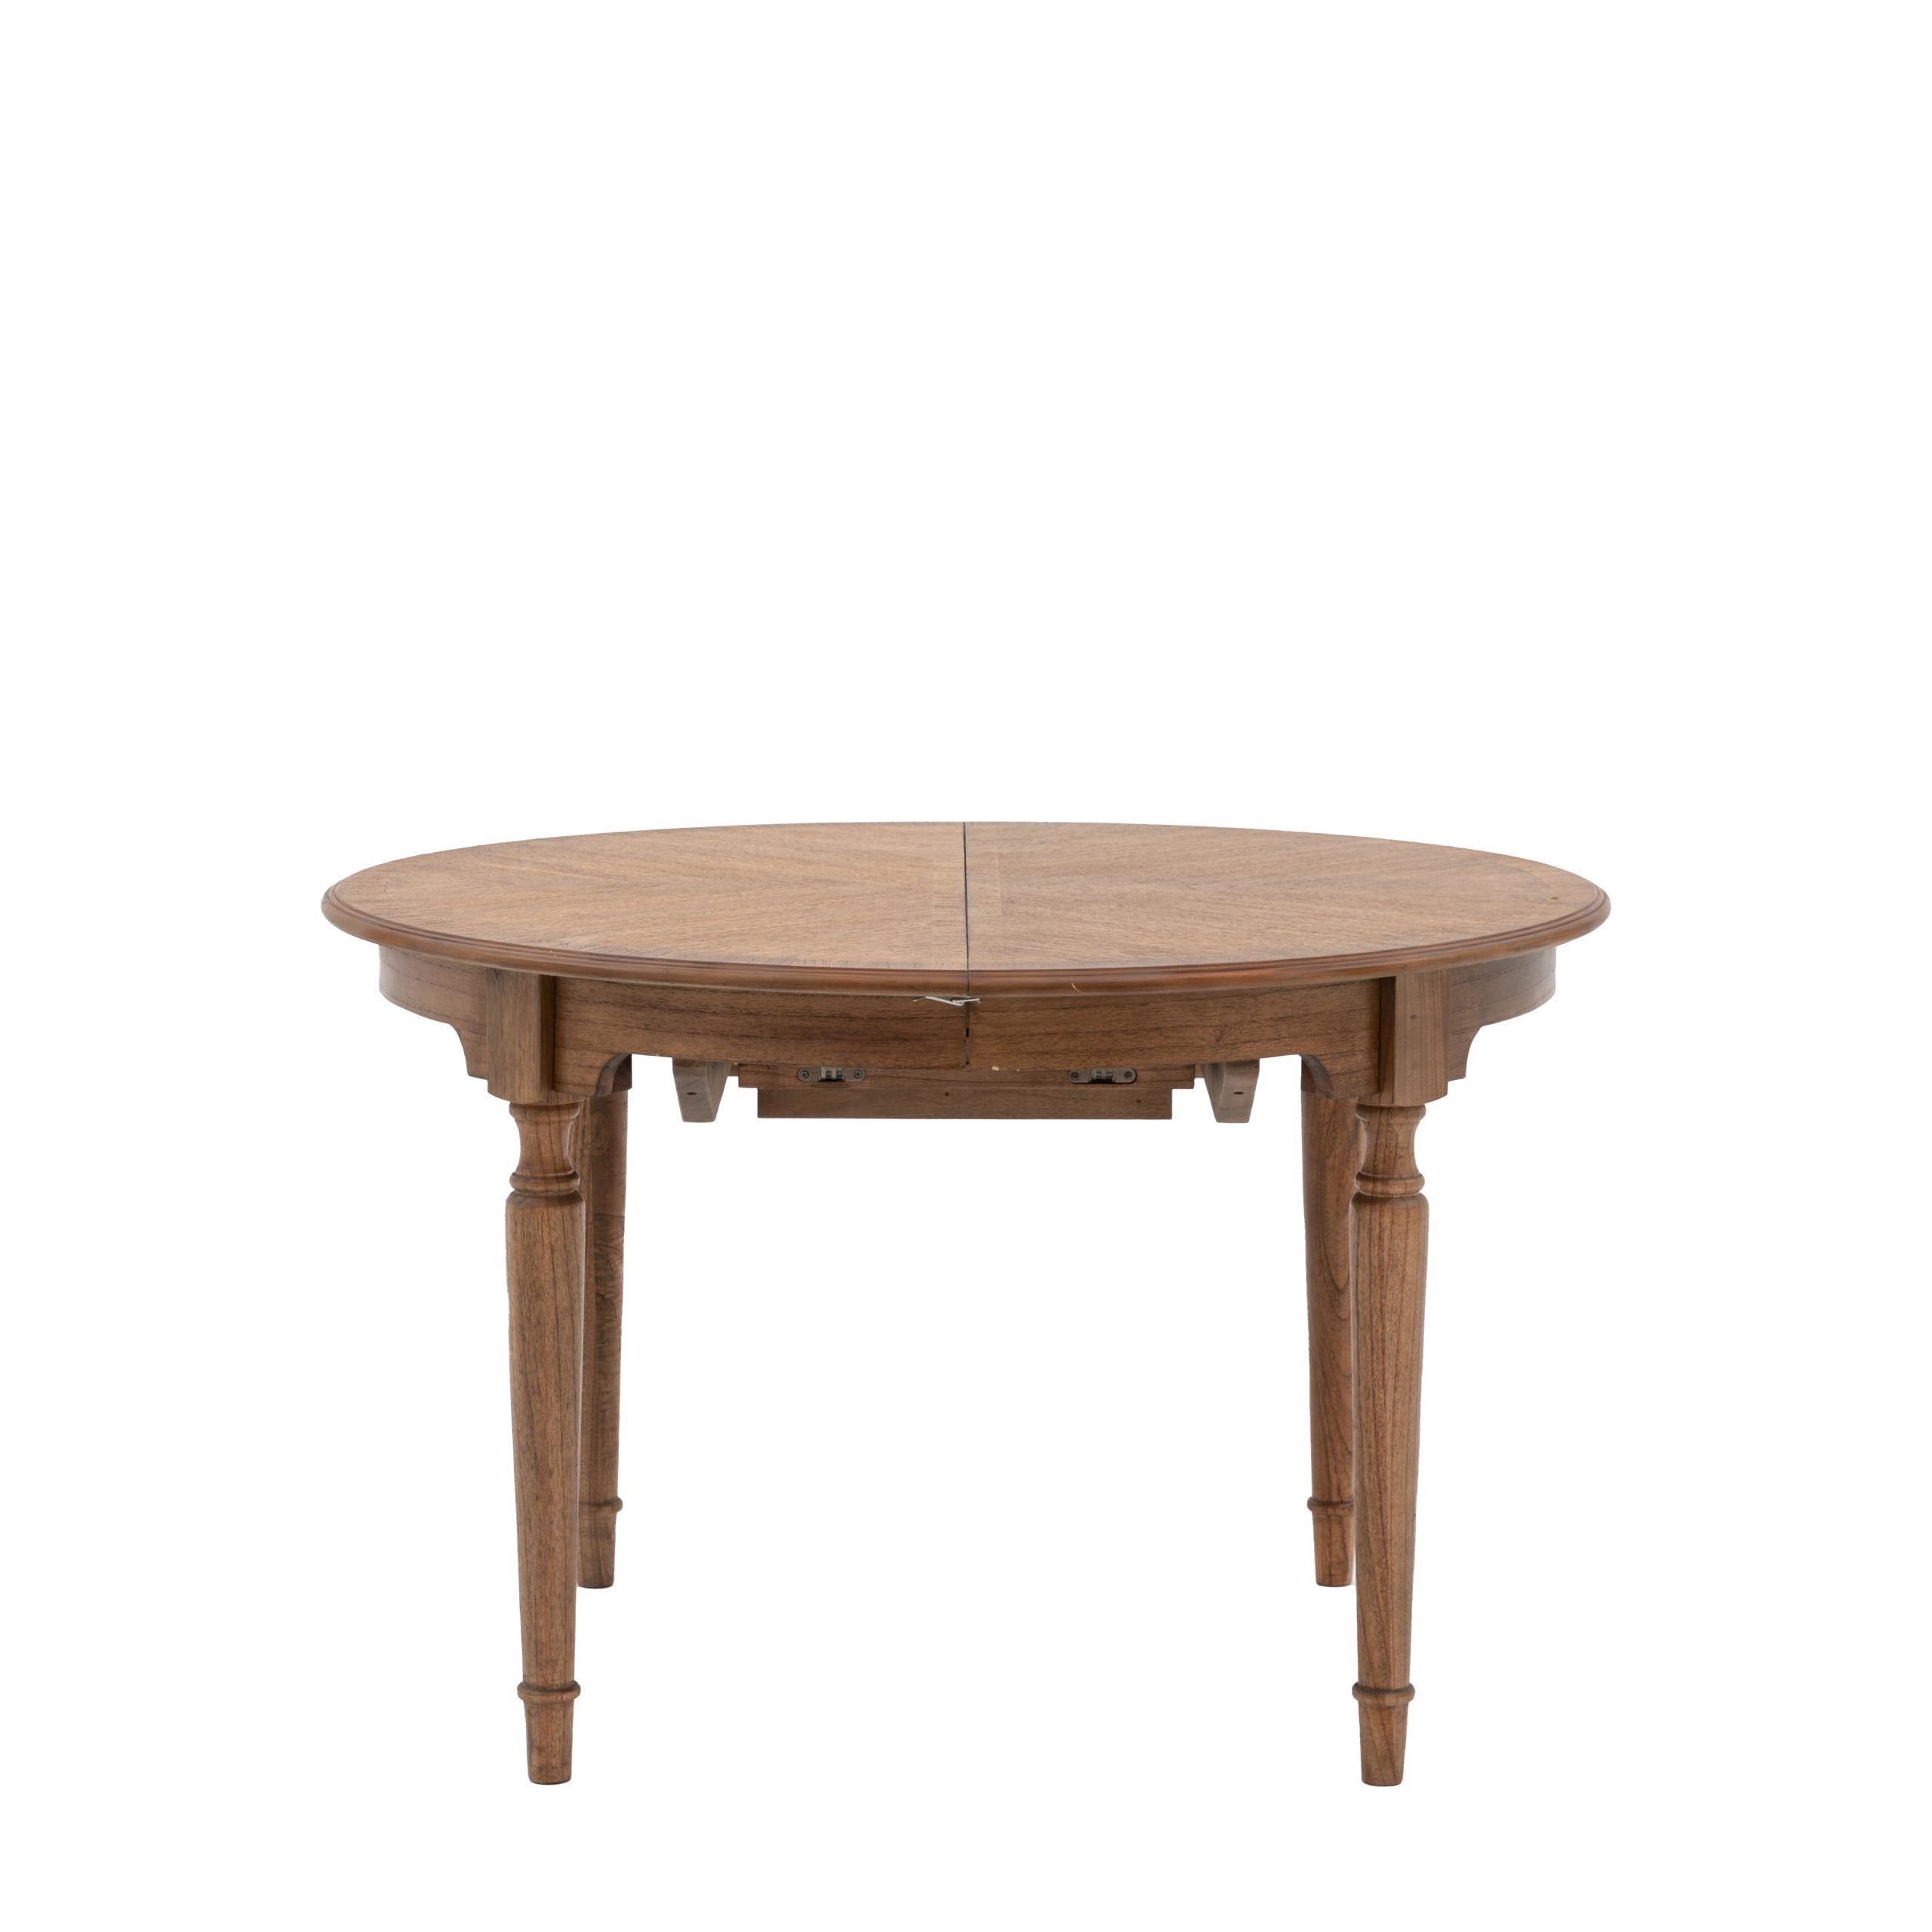 Gallery Direct Highgrove Extending Round Table